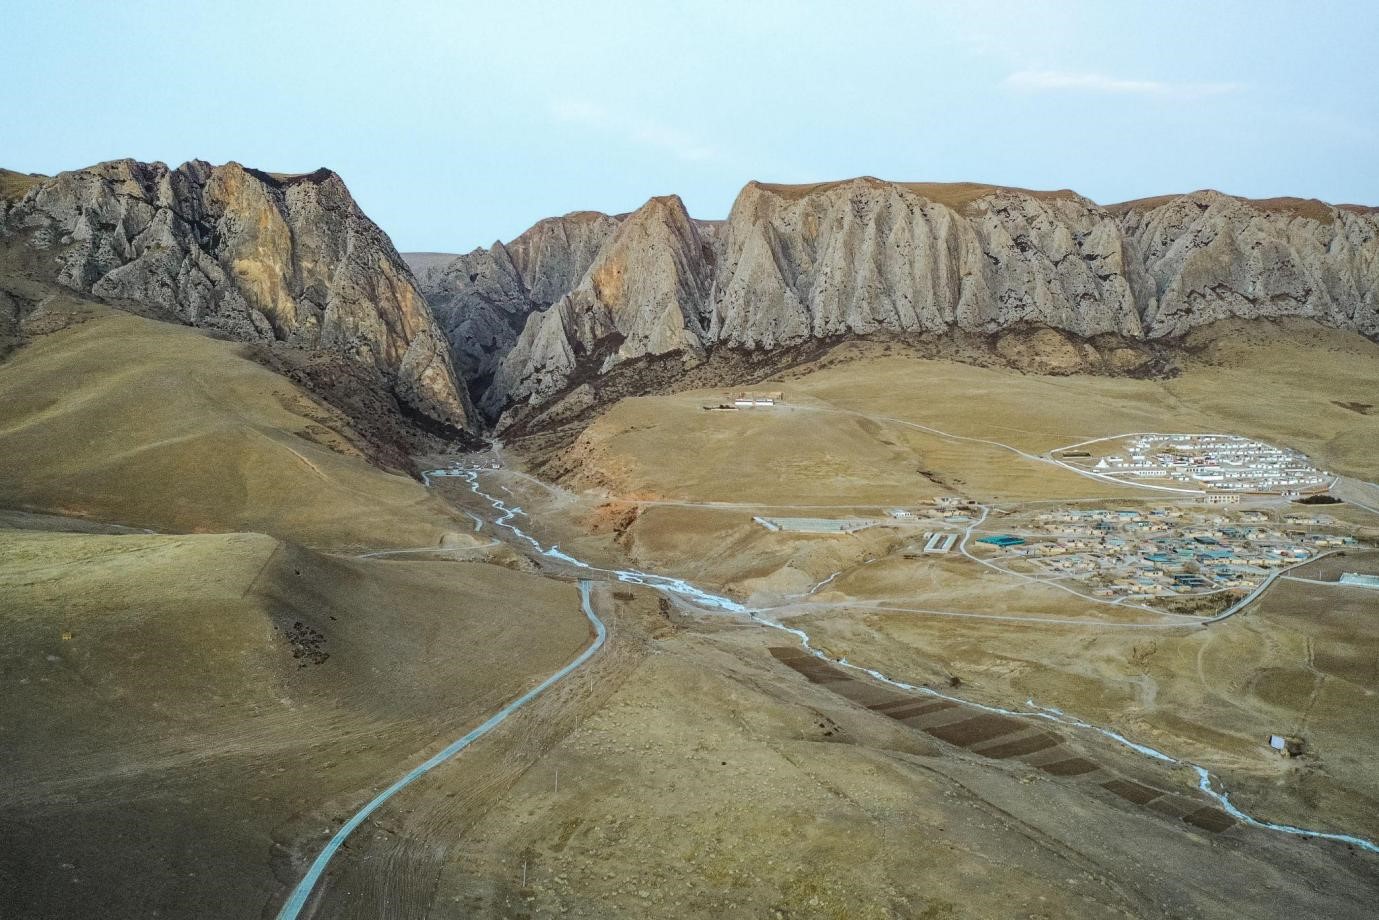 Researchers Reveal Dietary Diversity of Denisovans on Qinghai-Xizang Plateau